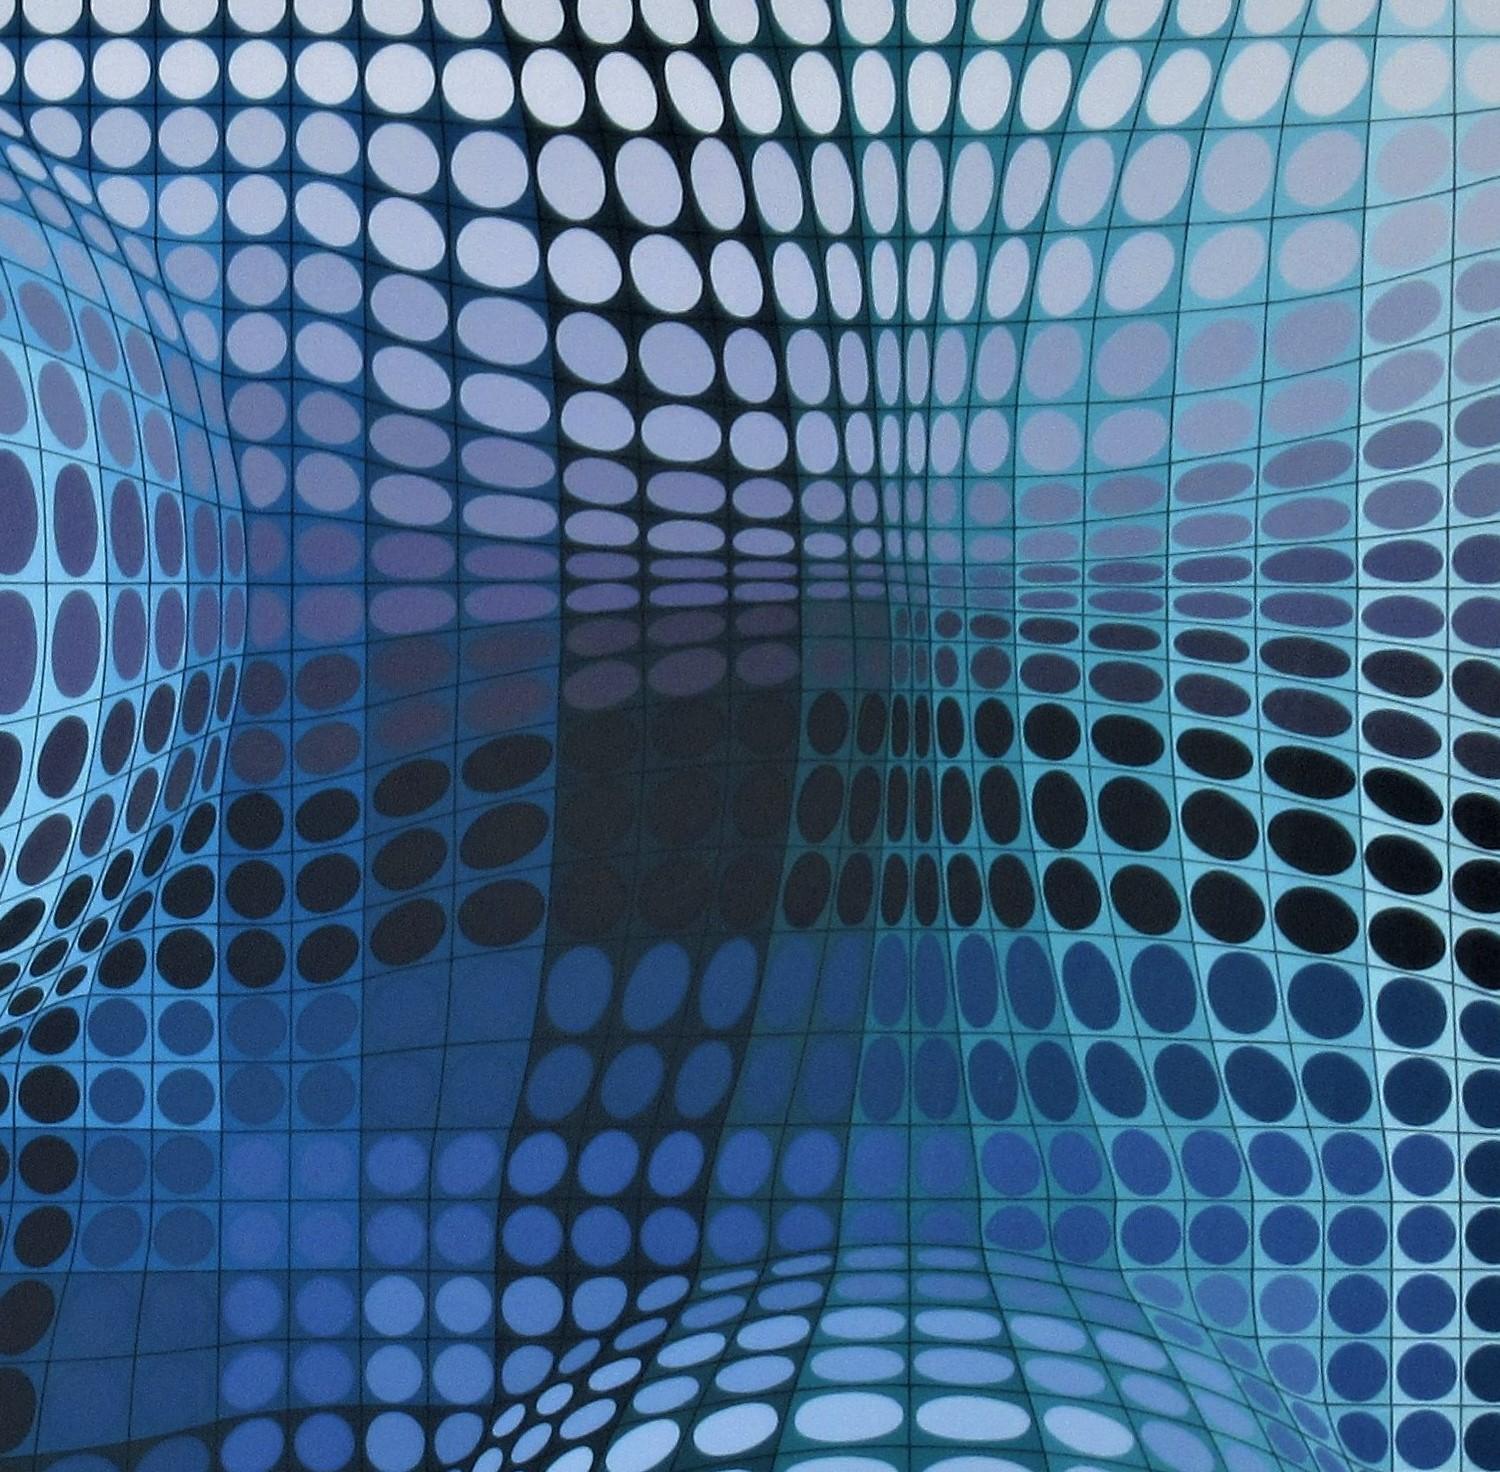 Artist:	Victor Vasarely, Hungarian, 1906-1997
Title:	Untitled
Year:	c.1975
Medium:	Original color screenprint
Edition:	Numbered 76/250
Paper:	Wove
Image size: 25.25 x 25.25 inches
Framed size:  36 x 25.25 inches
Signature:  Hand signed in pencil